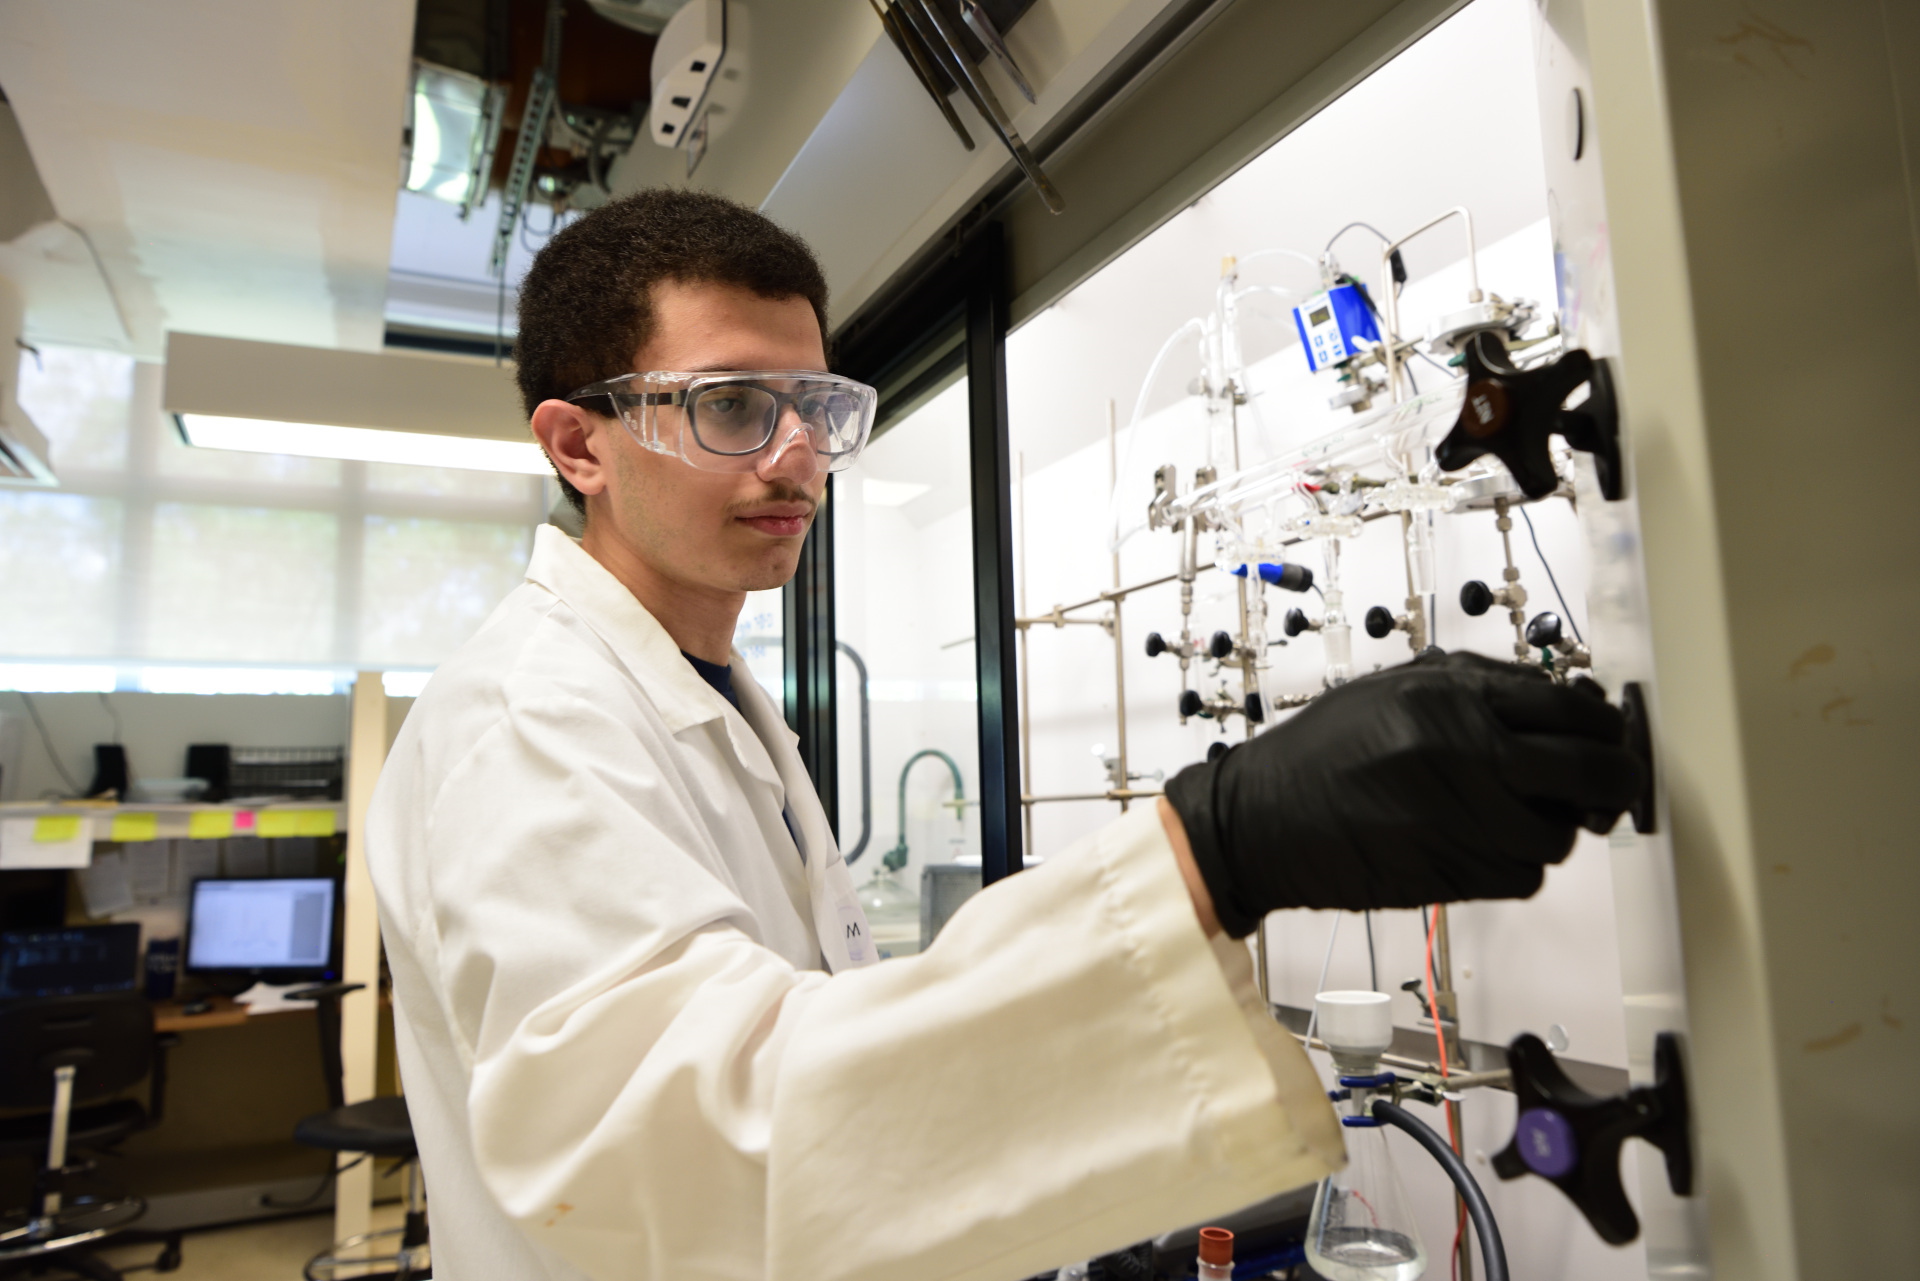 Mohammed Suleiman (VIPER '24) conducts research in the laboratory of Professor Thomas Mallouk in the Department of Chemistry. Mohammed spent the summer synthesizing and characterizing materials that can potentially be used for fuel cells.